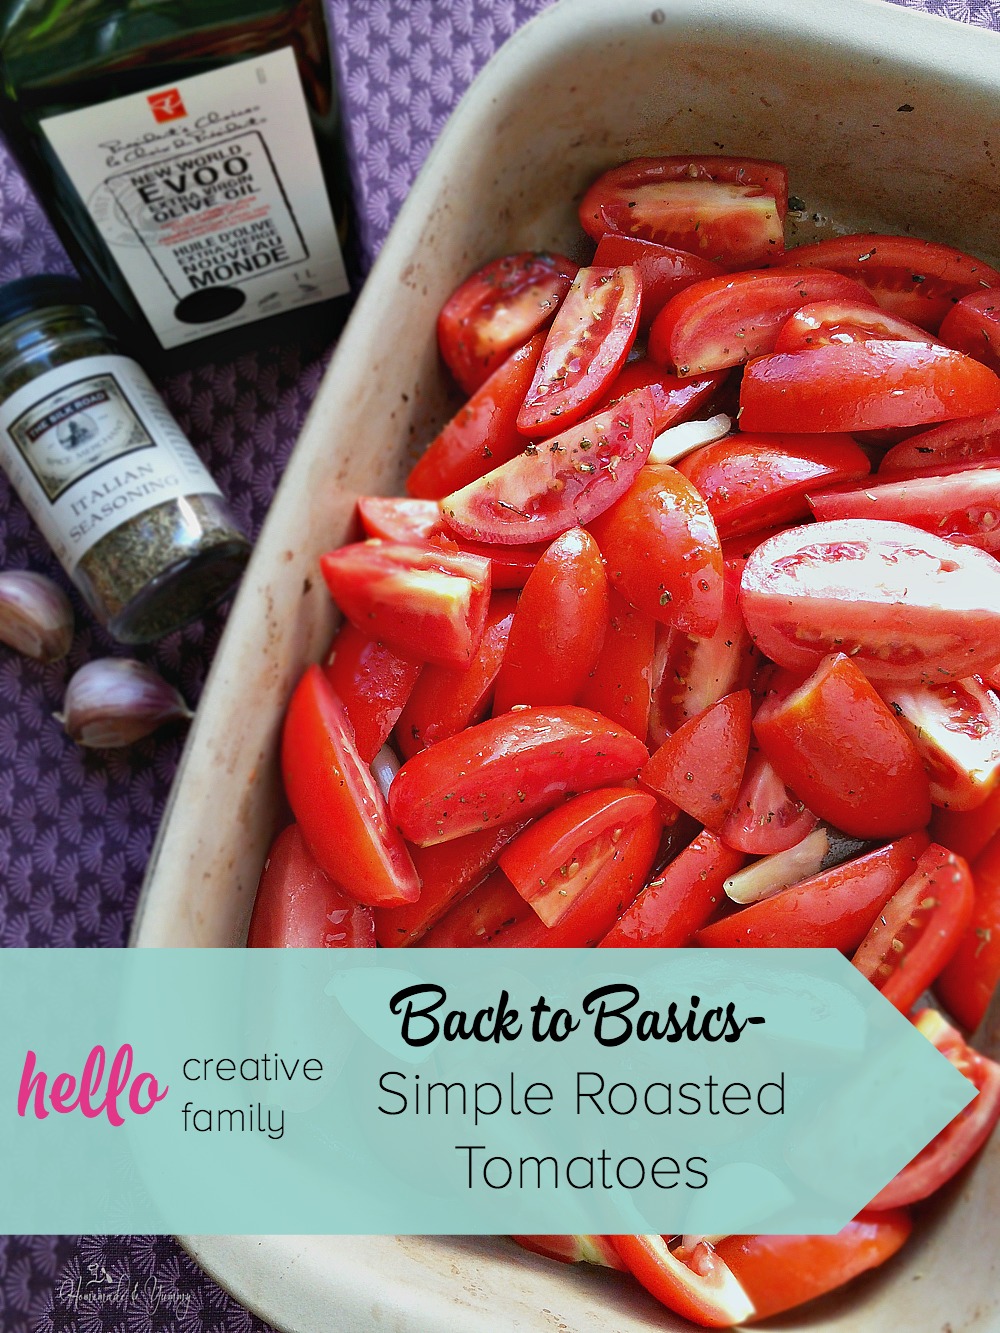 Gloria from Homemade and Yummy shares her Back To Basics recipe of Simple Roasted Tomatoes on Hello Creative Family. Perfect for storing in the freezer for quick sauces!